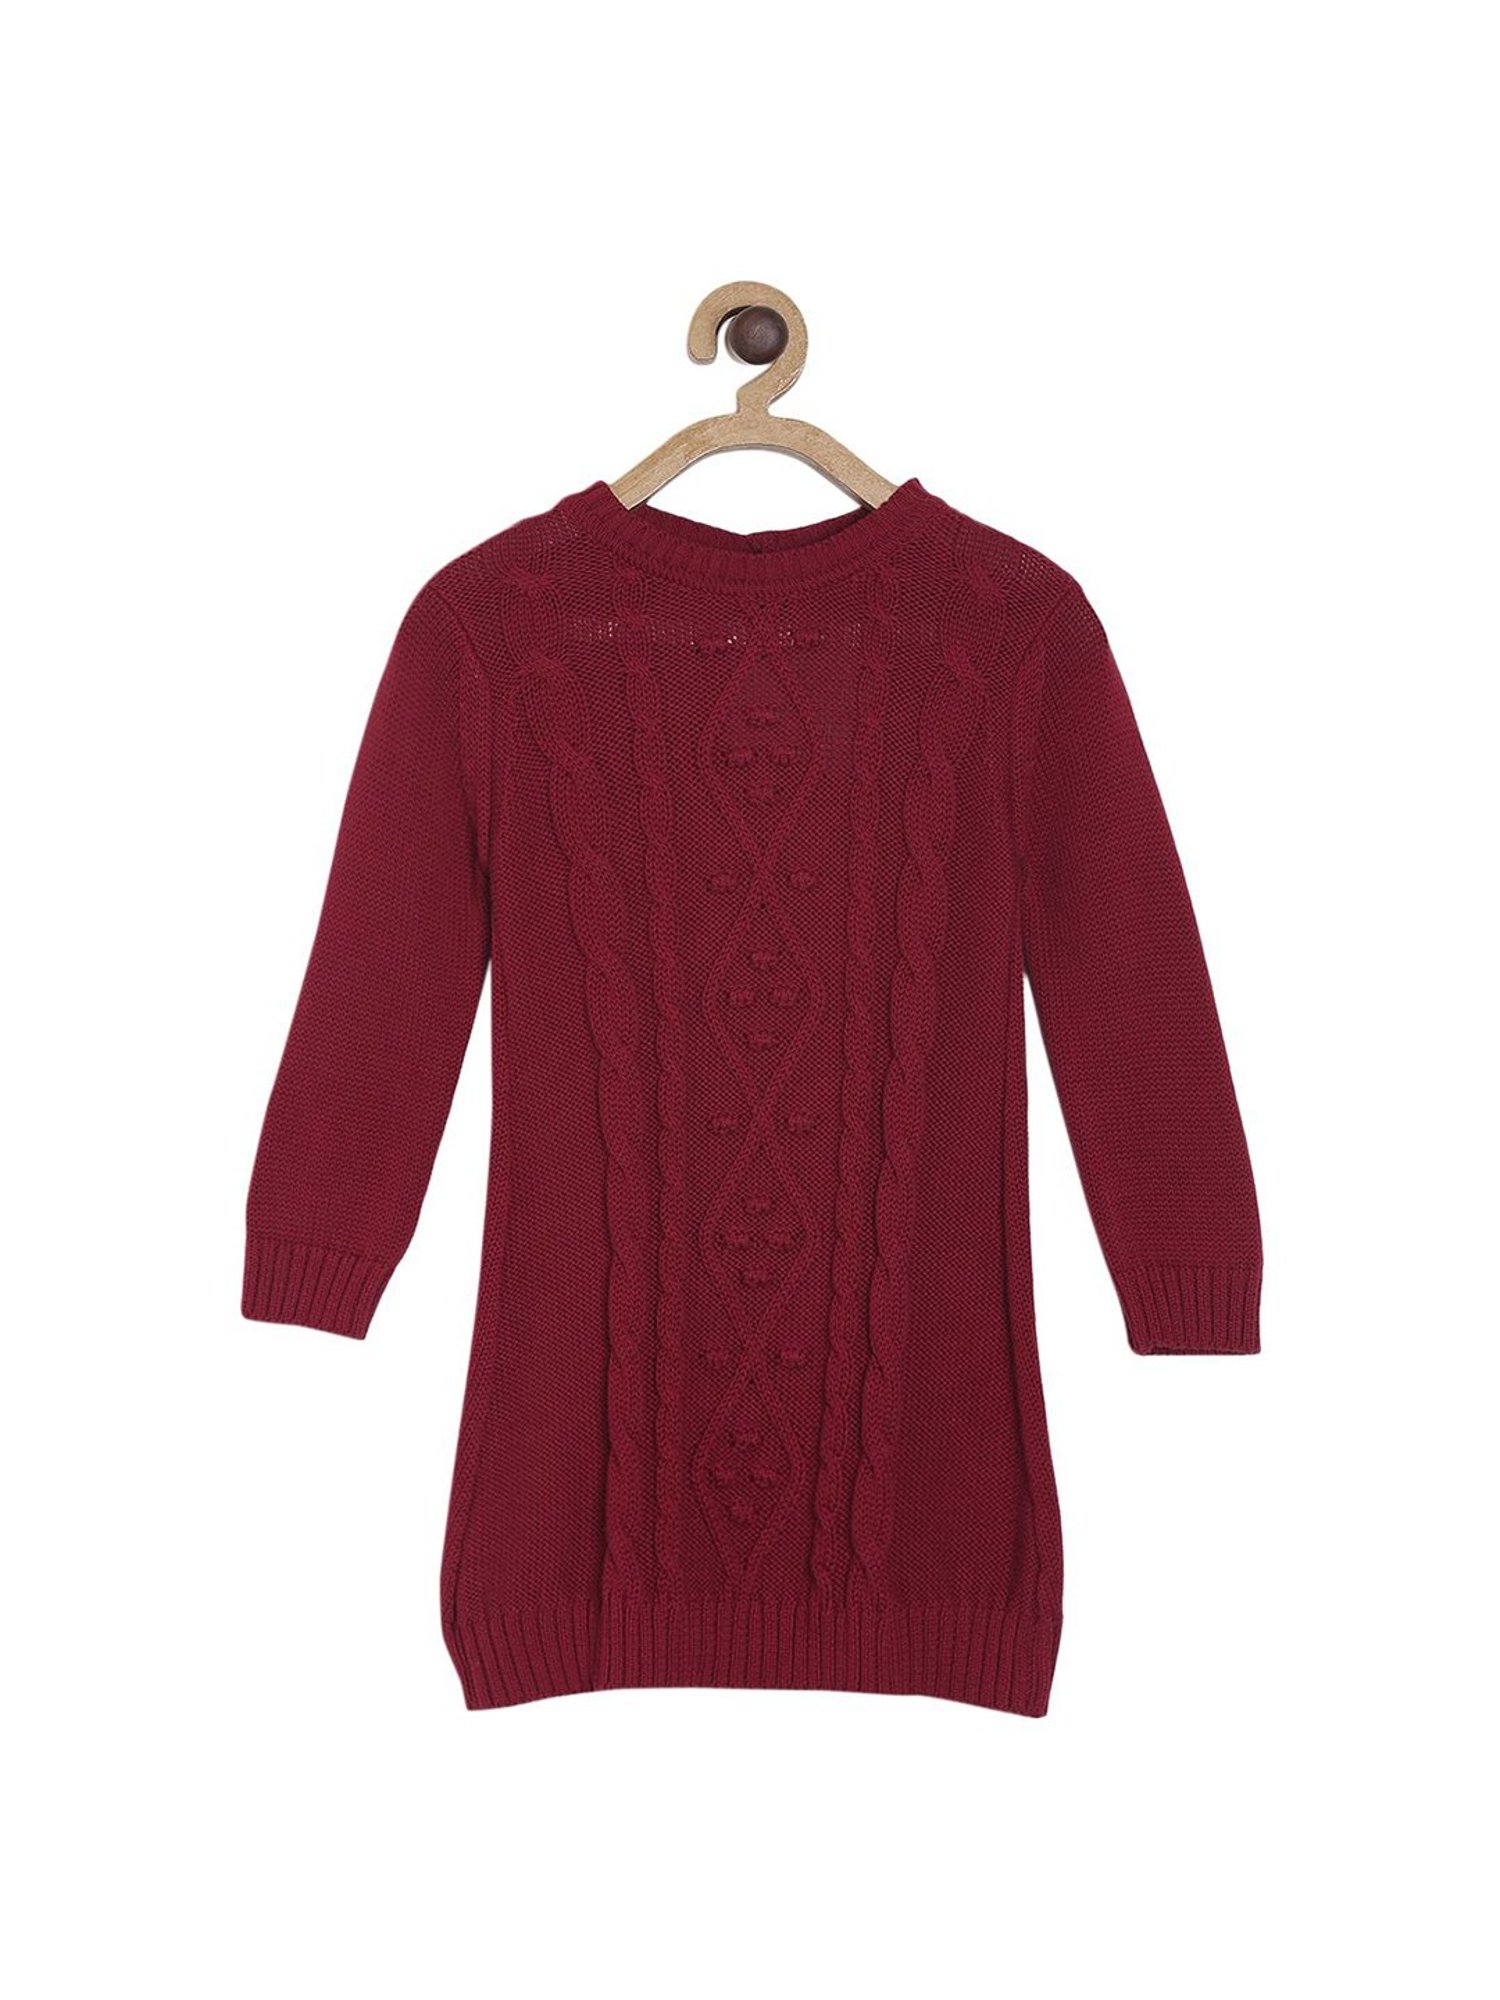 ₪160-Autumn And Winter New Childrens Knitted College Style Big Red Girls  Sweater Dress-Description